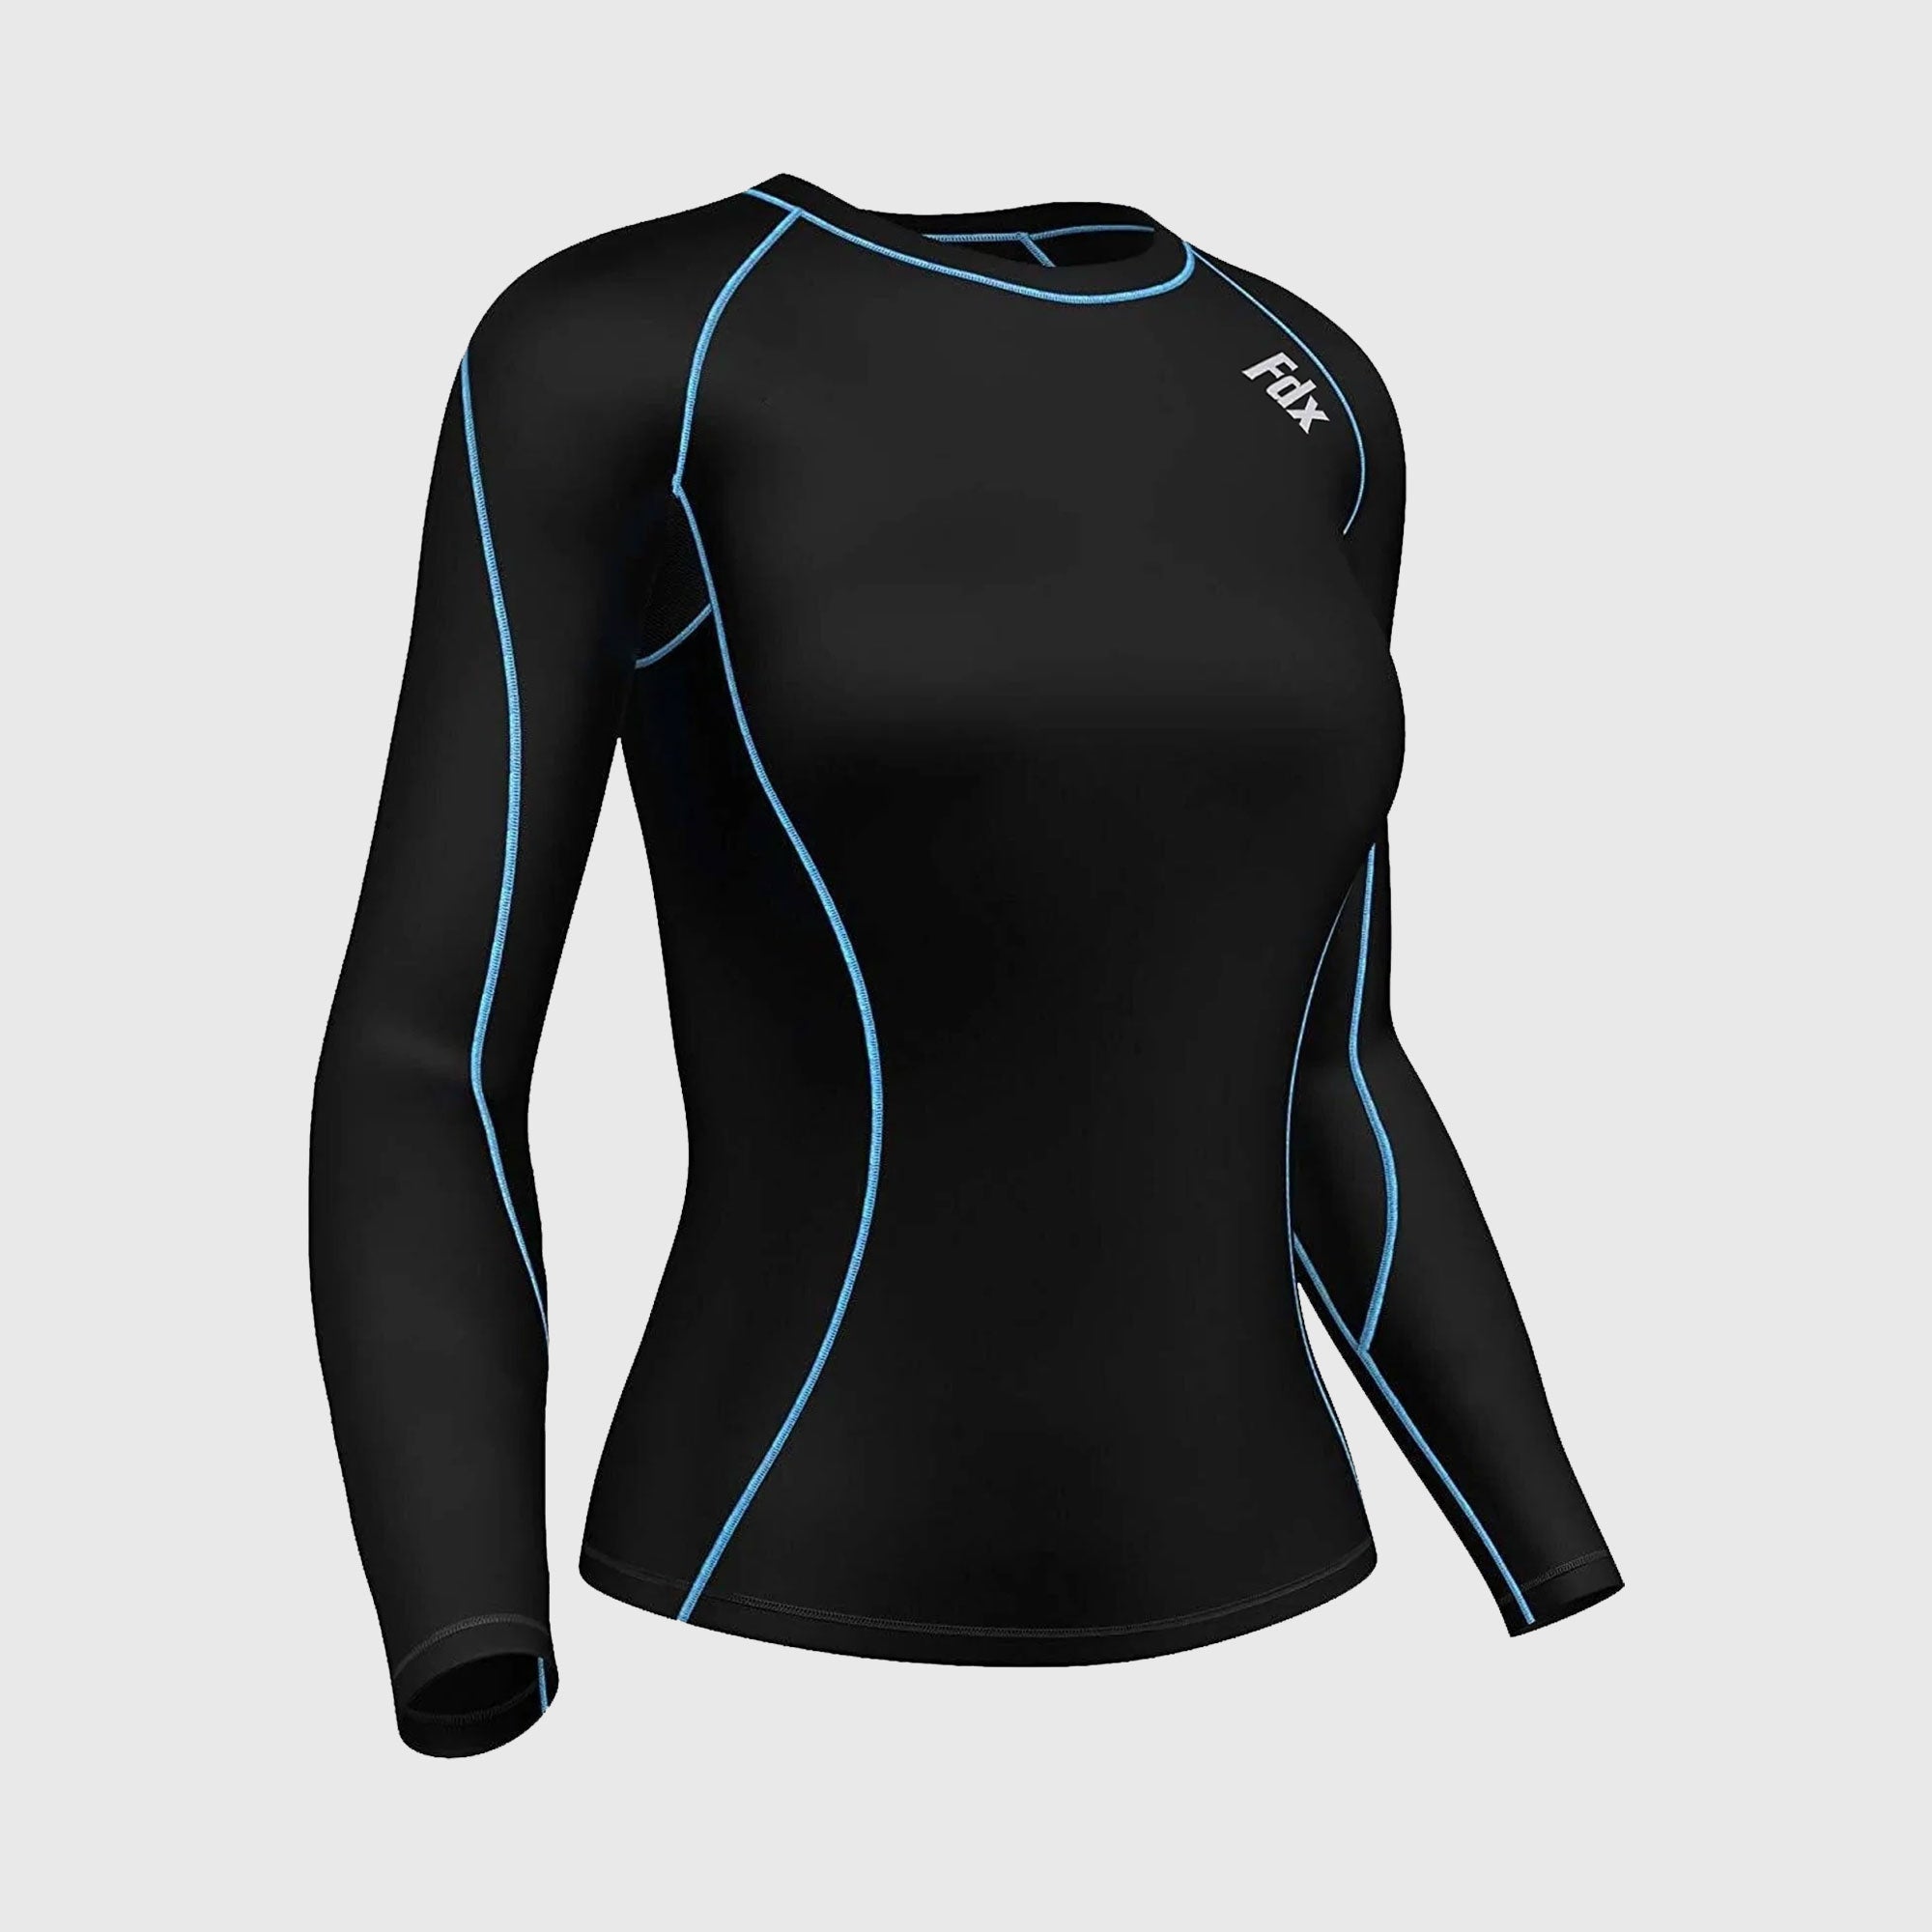 Fdx Monarch Blue Women's Base Layer Long Sleeve Compression Top